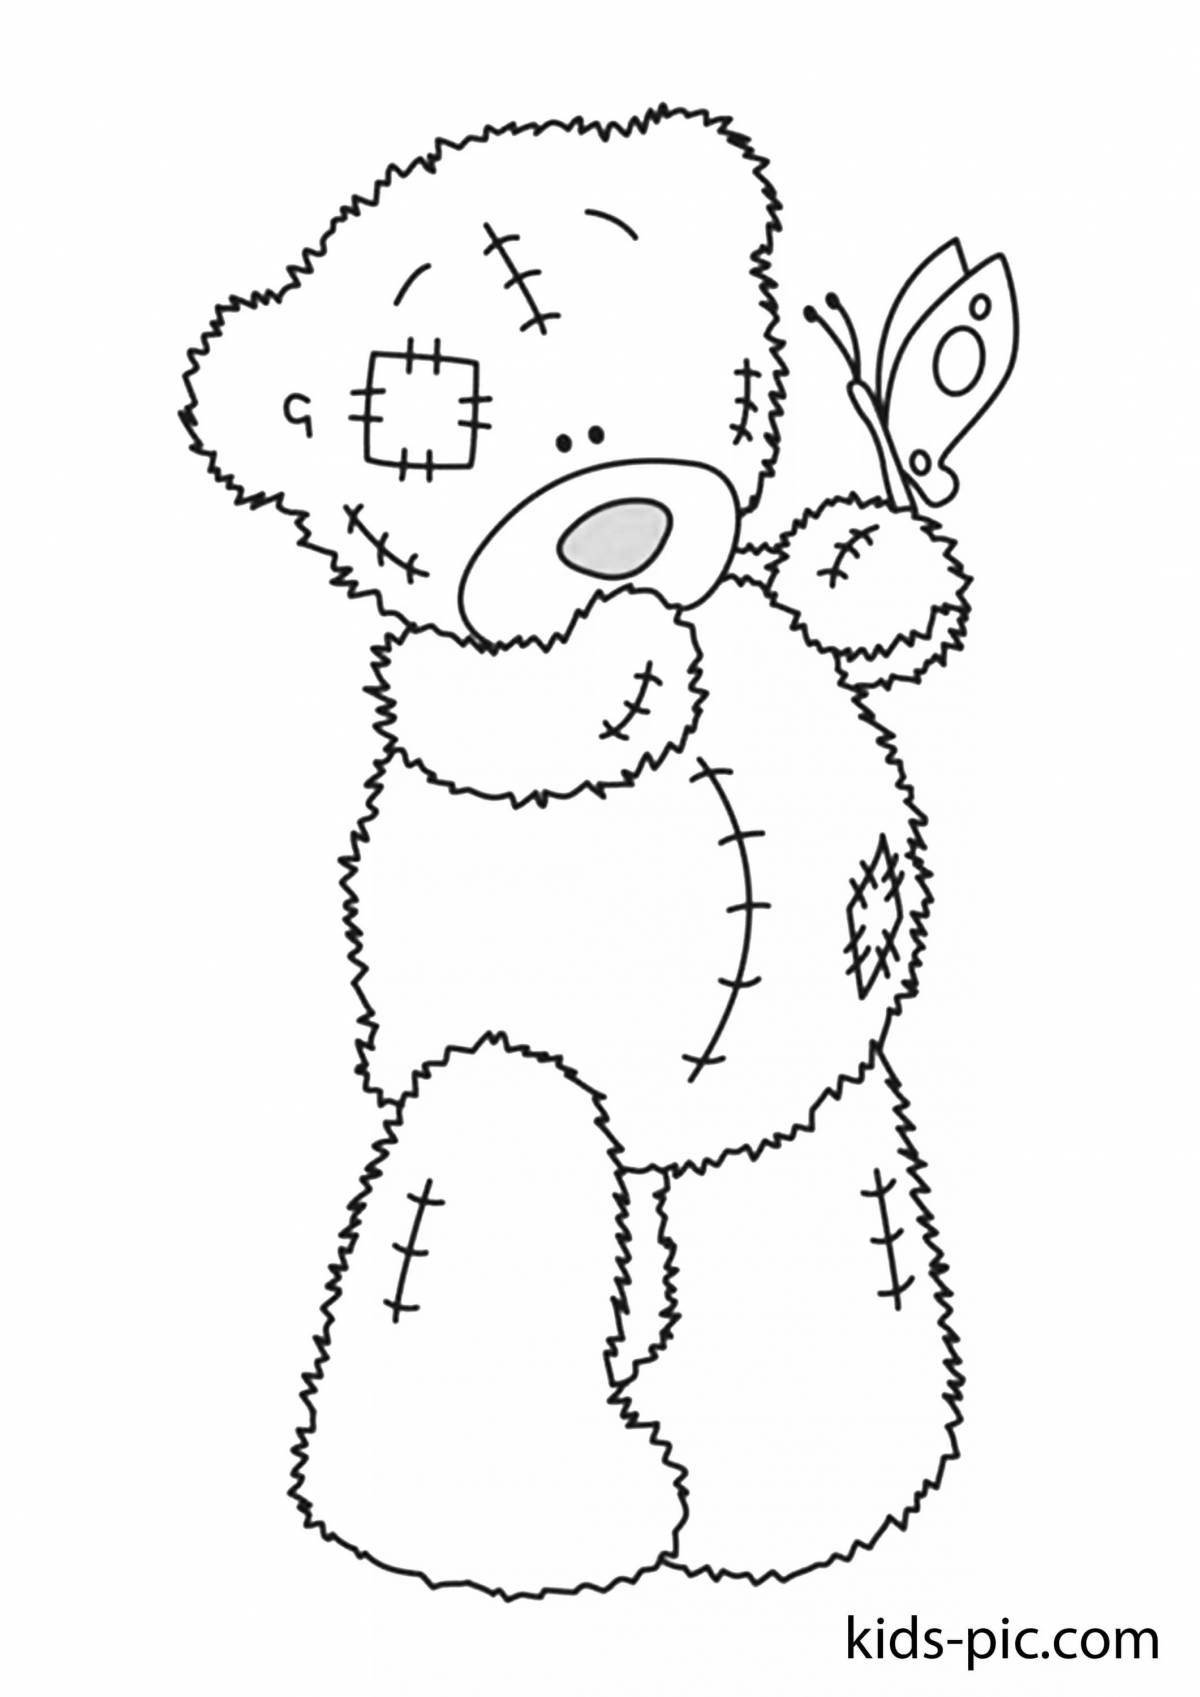 Great push plush coloring page